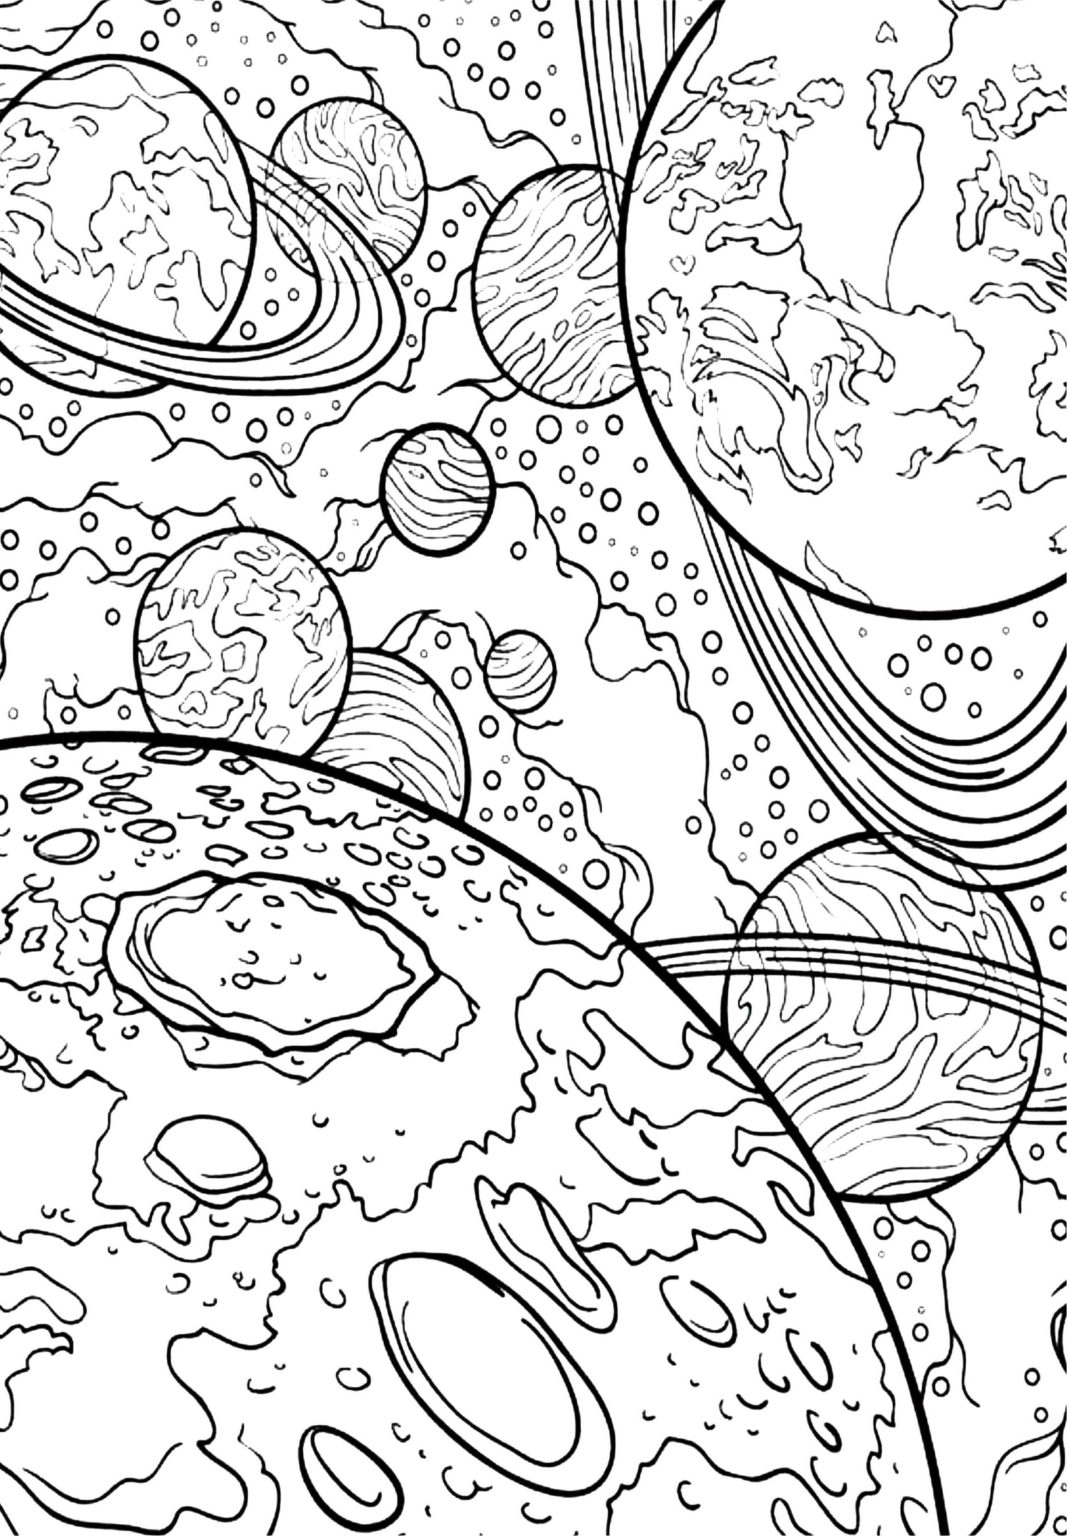 Free Coloring Pages Planets - Free Printable Templates